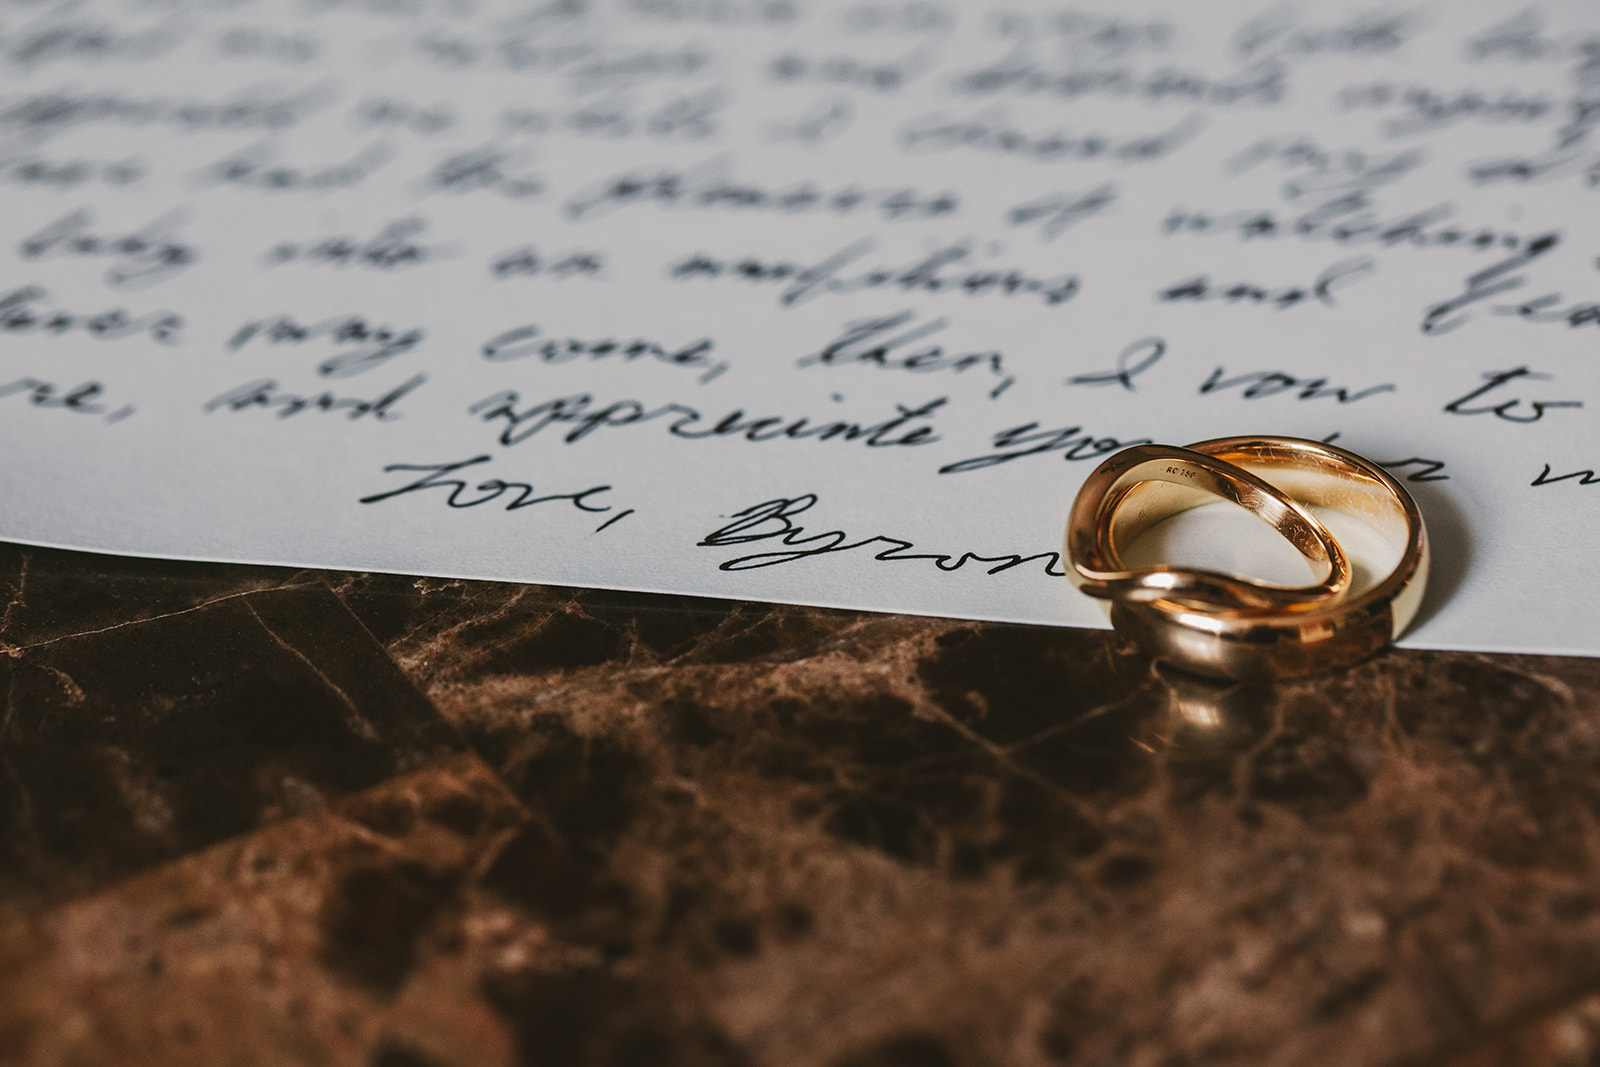 The wedding ring on the piece of paper the groom wrote his vows on that afternoon.